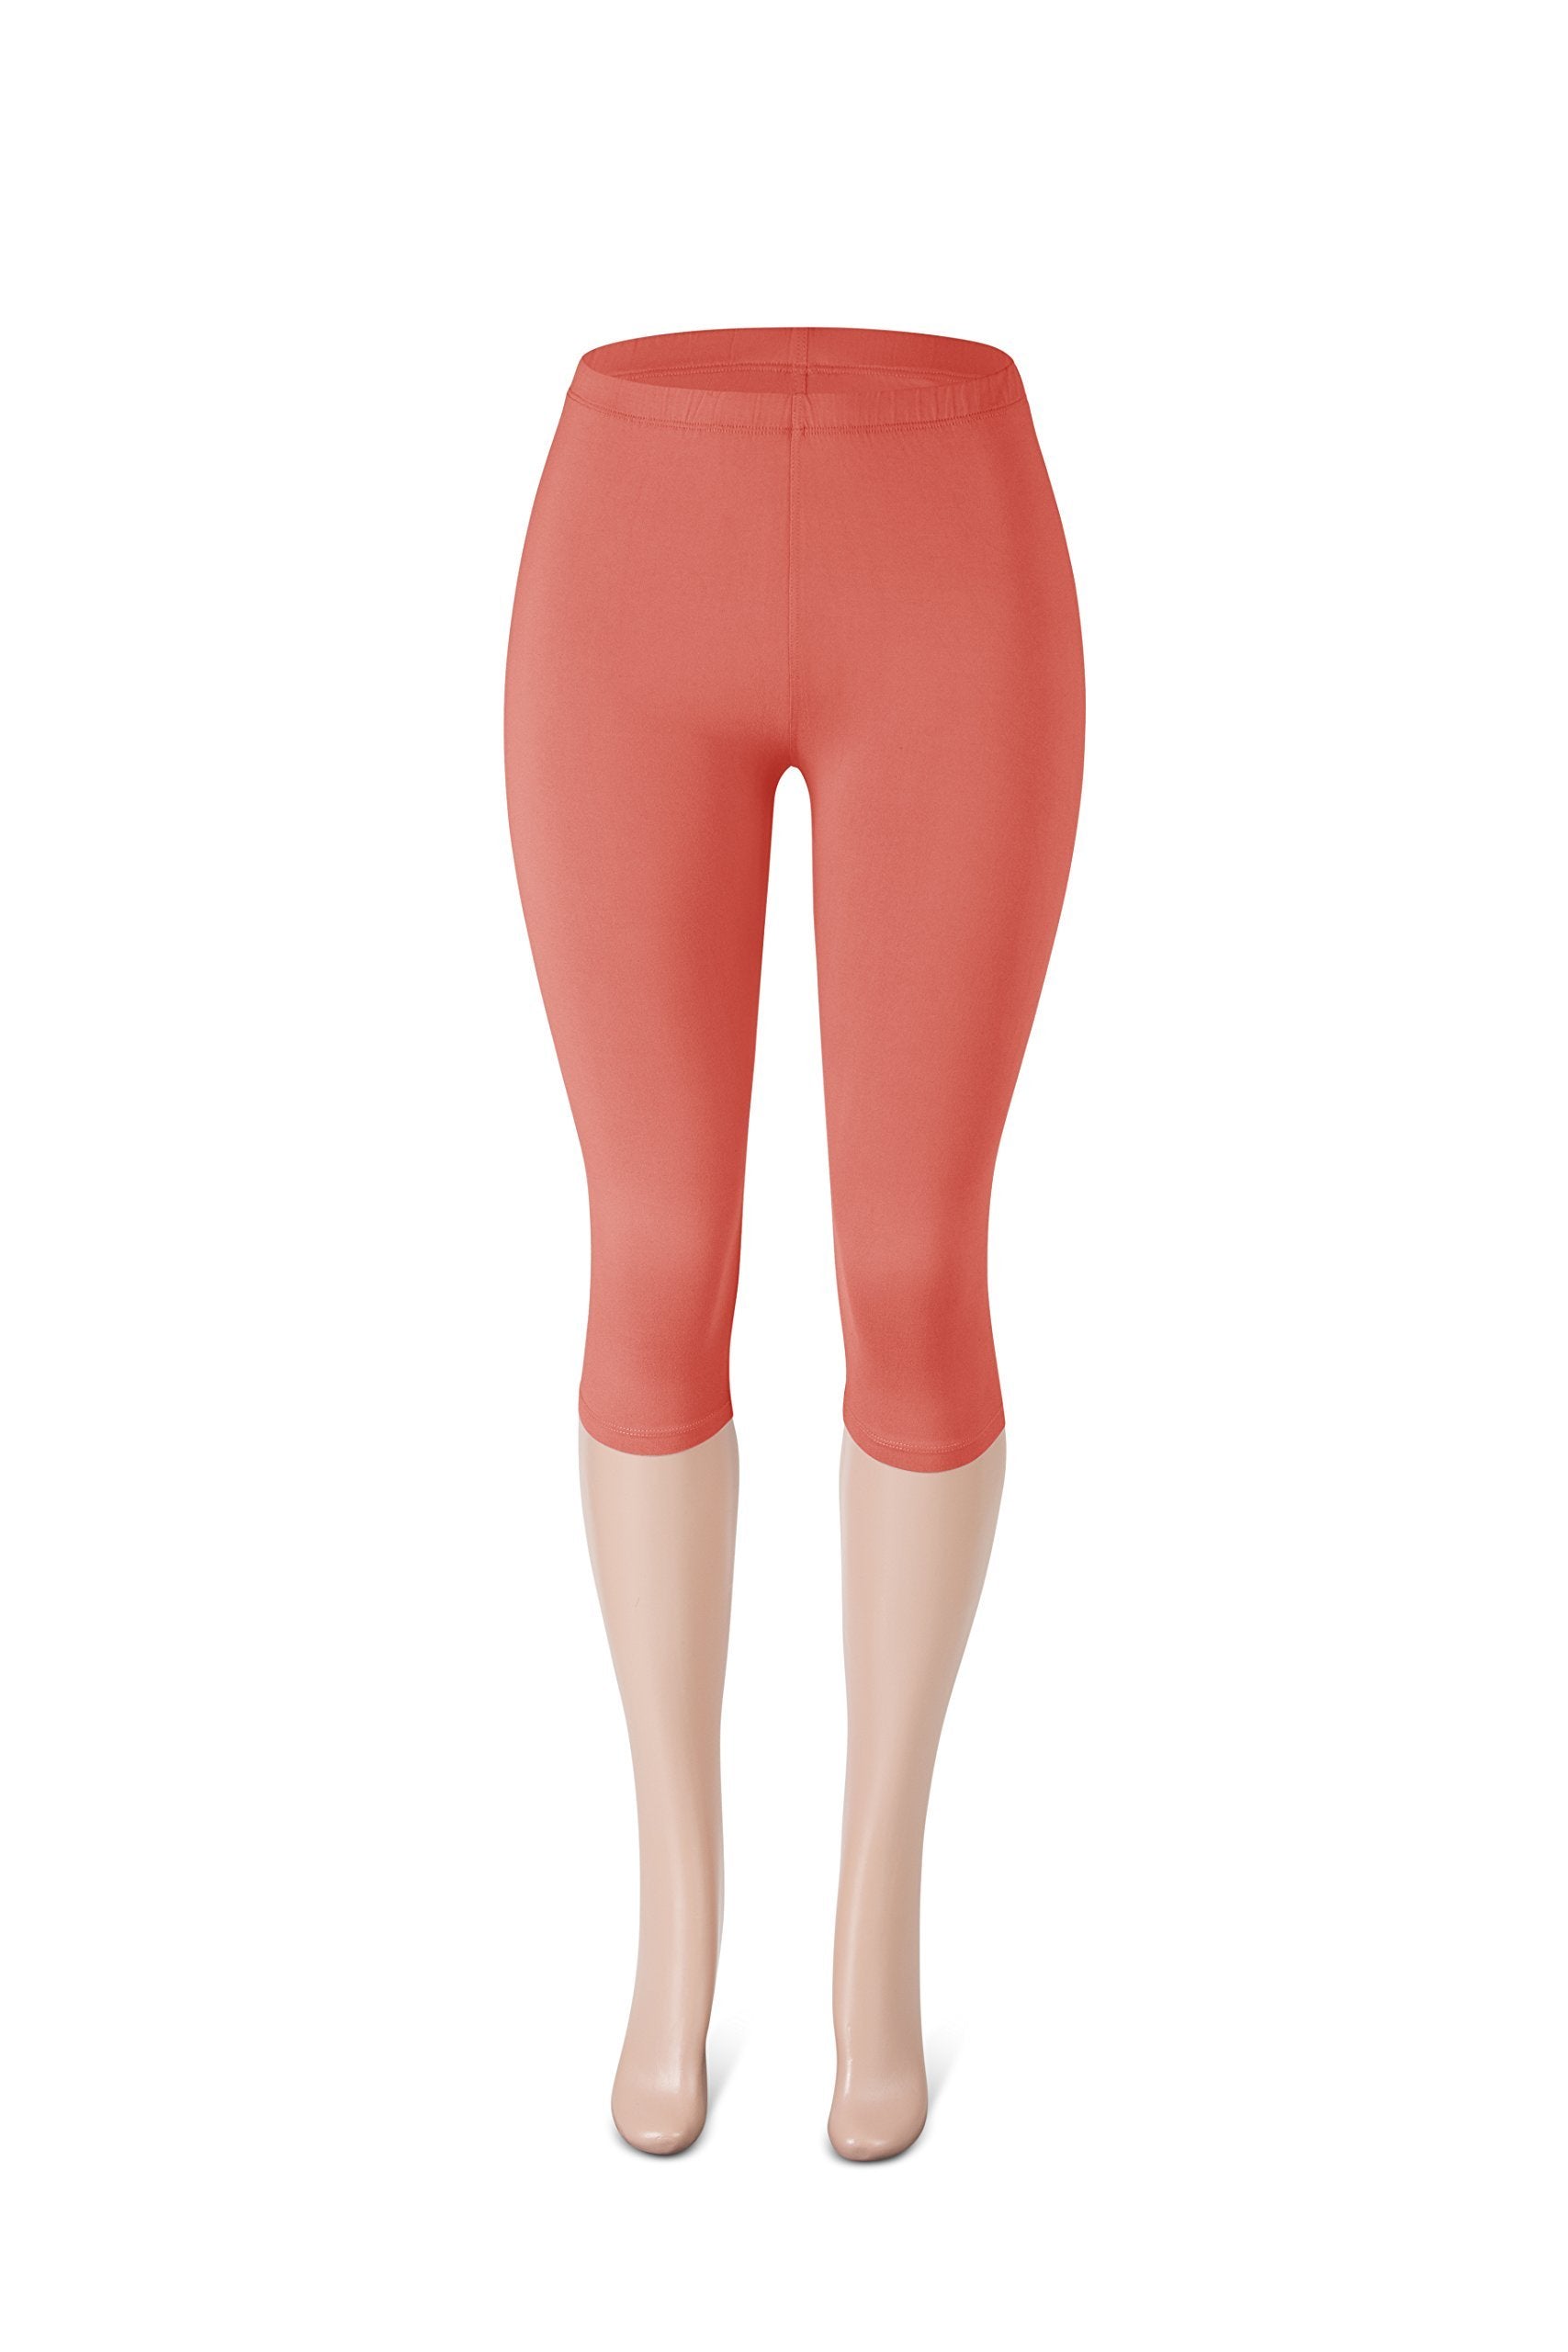 SATINA Coral Capri Leggings with 1 Waistband - High Waisted, One Size Fits Most